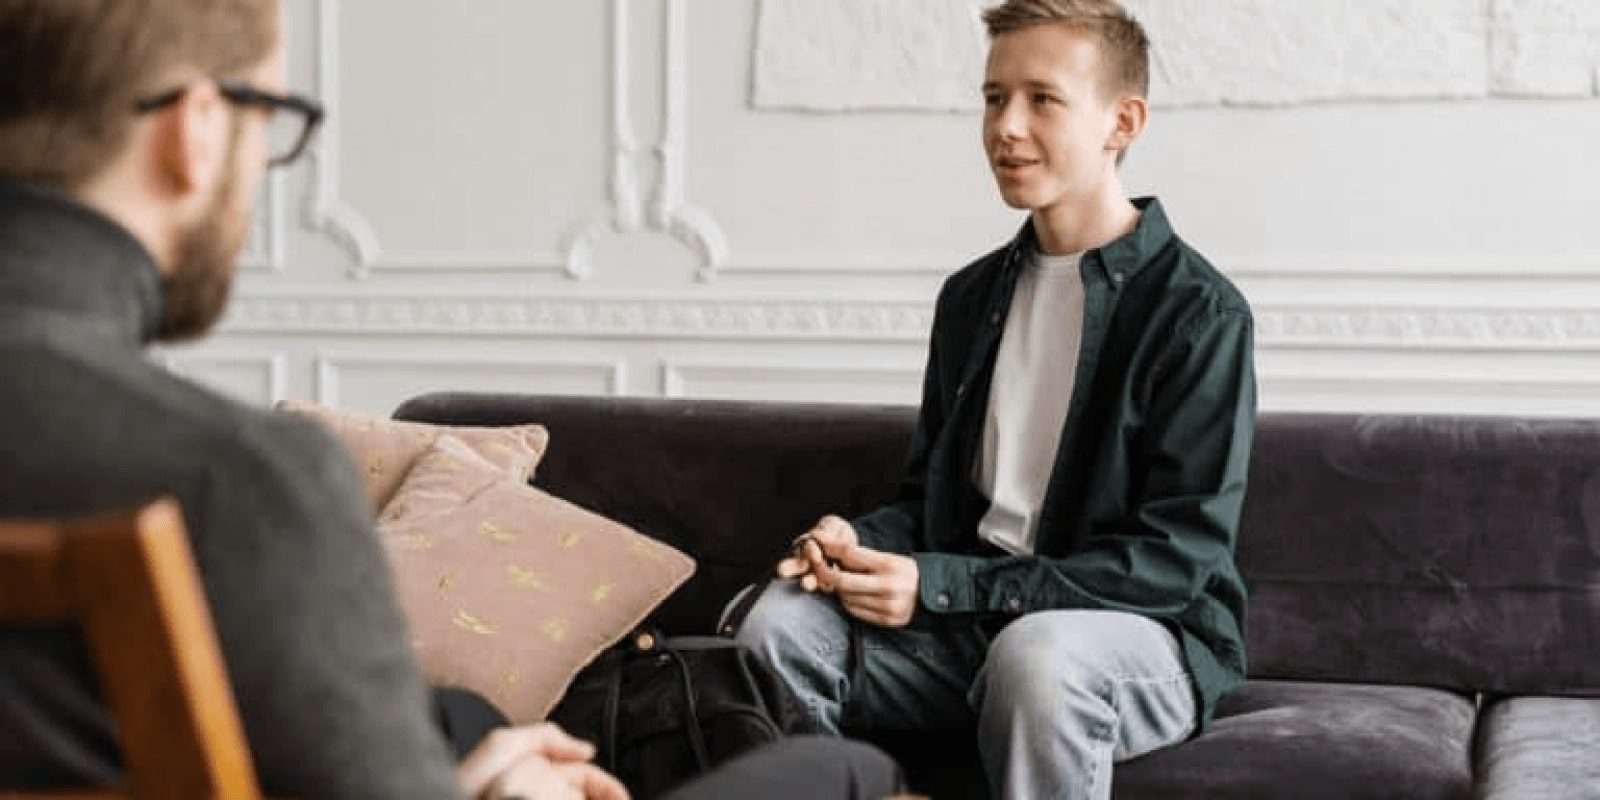 A teen boy participating in an individual therapy session with a male therapist